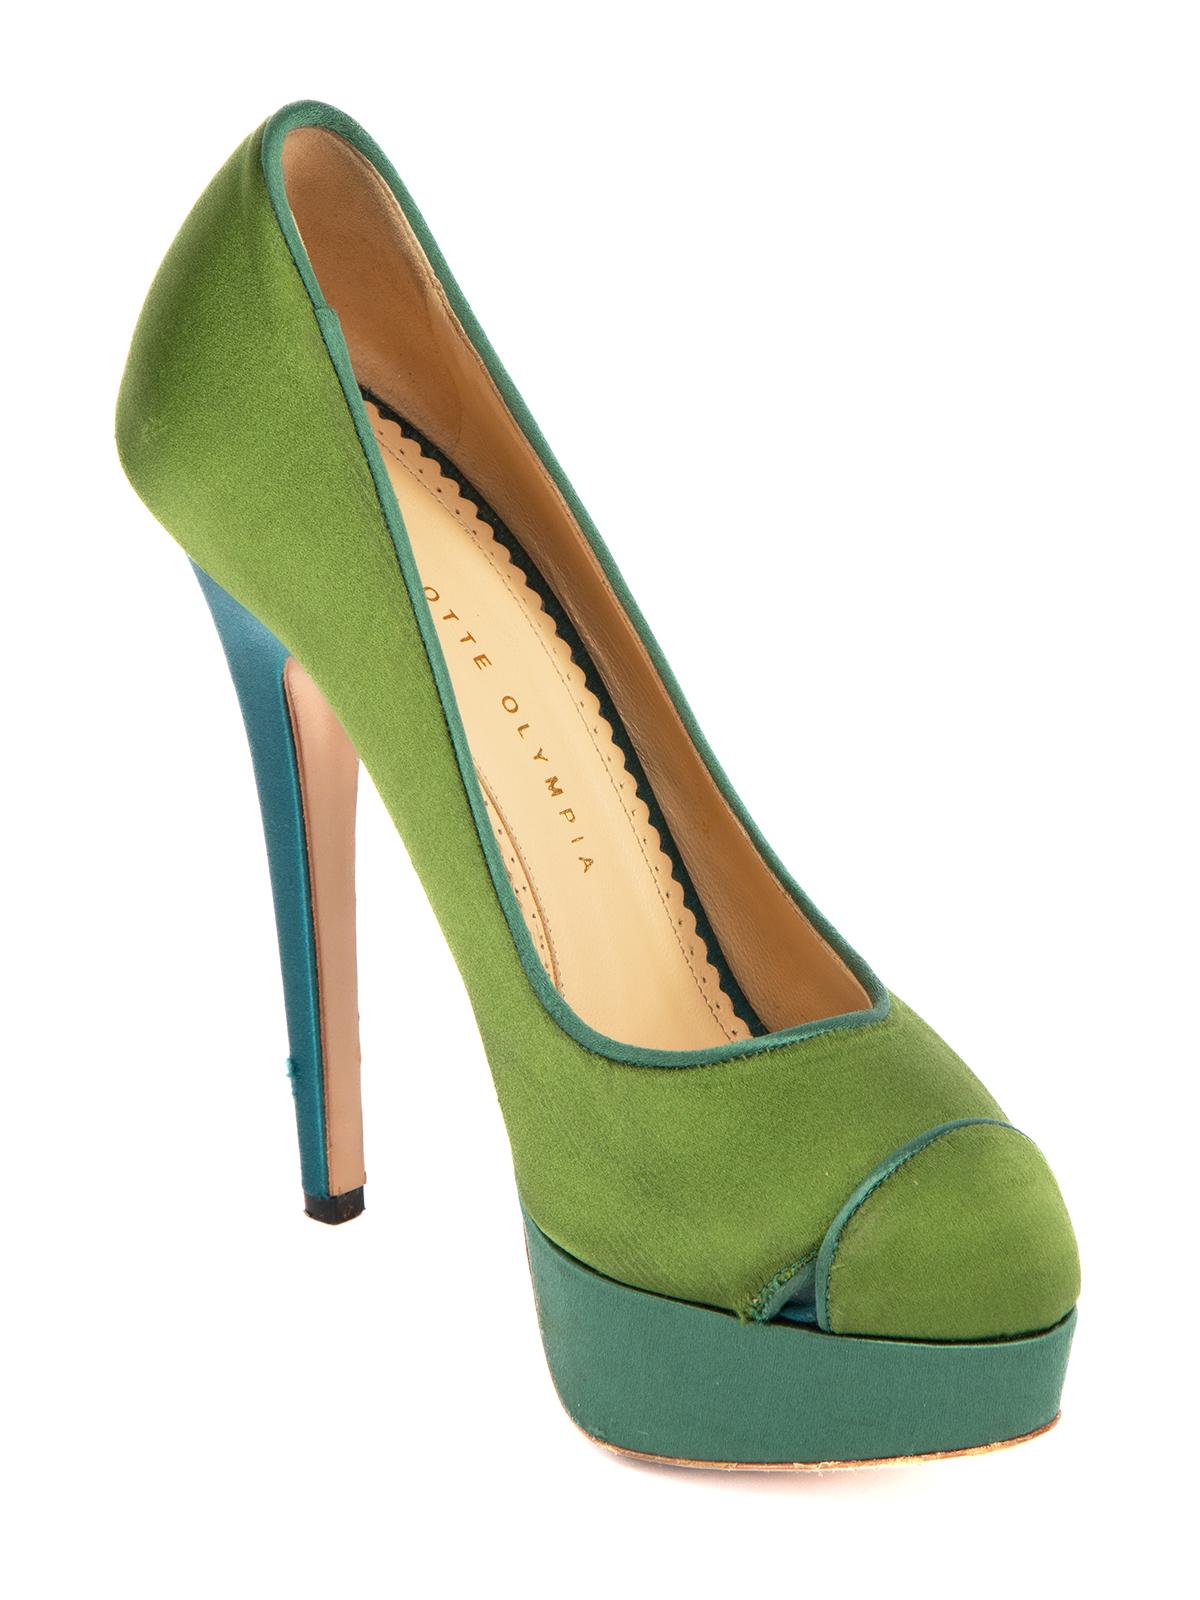 CONDITION is Good. Minor wear to heels is evident. Wear/stains to satin exterior and fraying. The satin on the heel stem also frayed on this used Charlotte Olympia designer resale item.   Details  Two Tones of Green Satin Platform Round-toe    Made